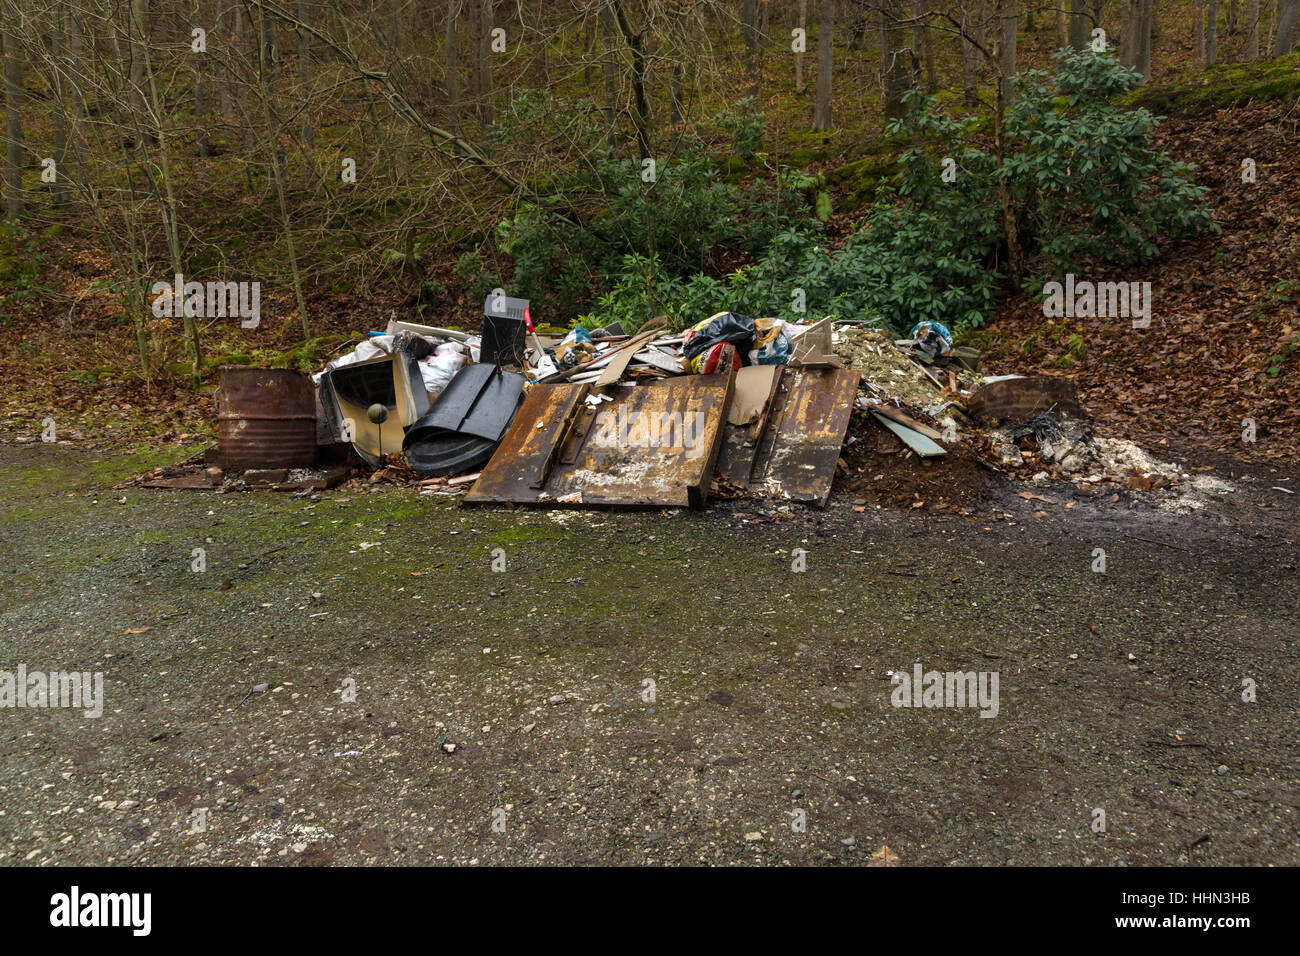 Dumped rubbish and garbage in a forest an example of fly tipping or illegal dumping on a forest trail in North Wales Stock Photo